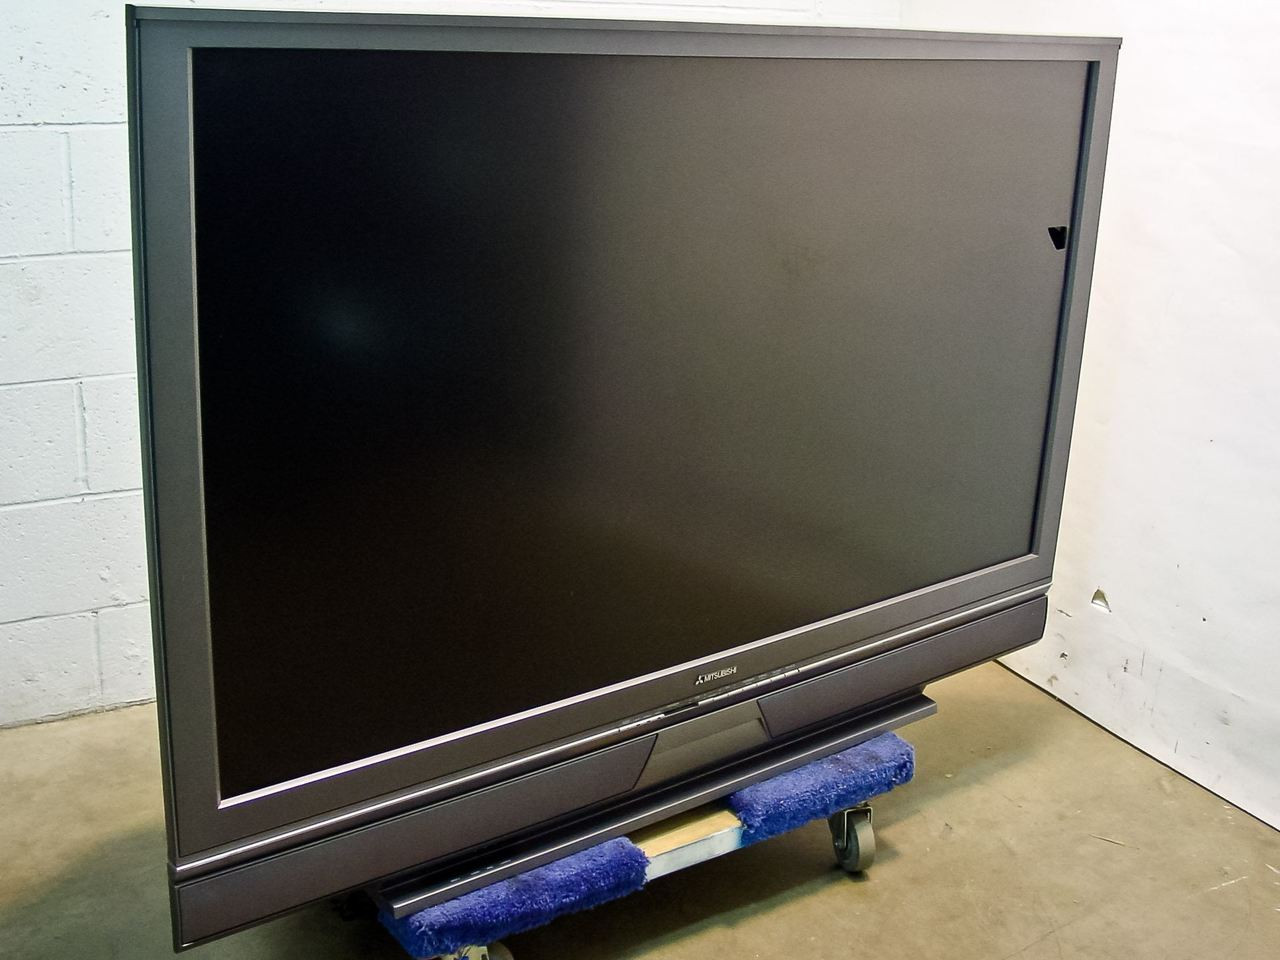 How To Clean A Mitsubishi Projection TV